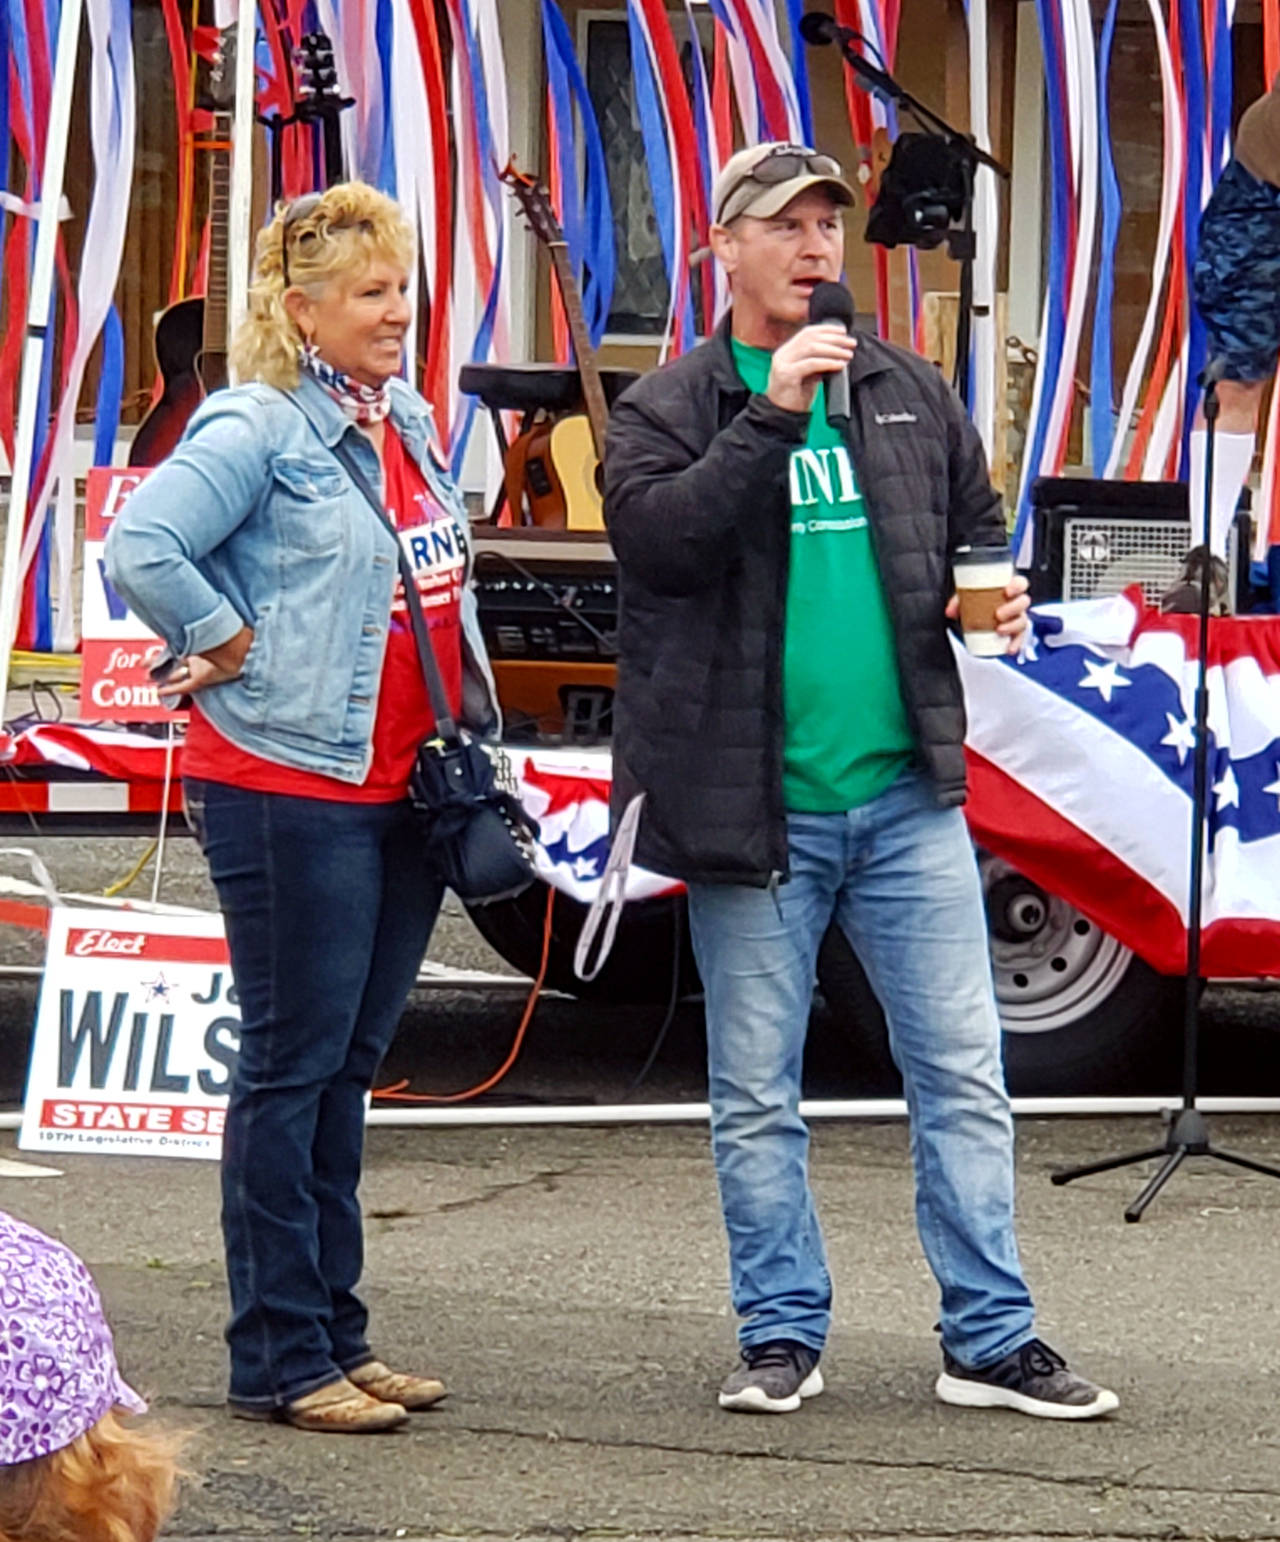 FILE PHOTO 
Grays Harbor County Commissioners Jill Warne and Kevin Pine at a pre-election rally in Aberdeen Sept. 19.